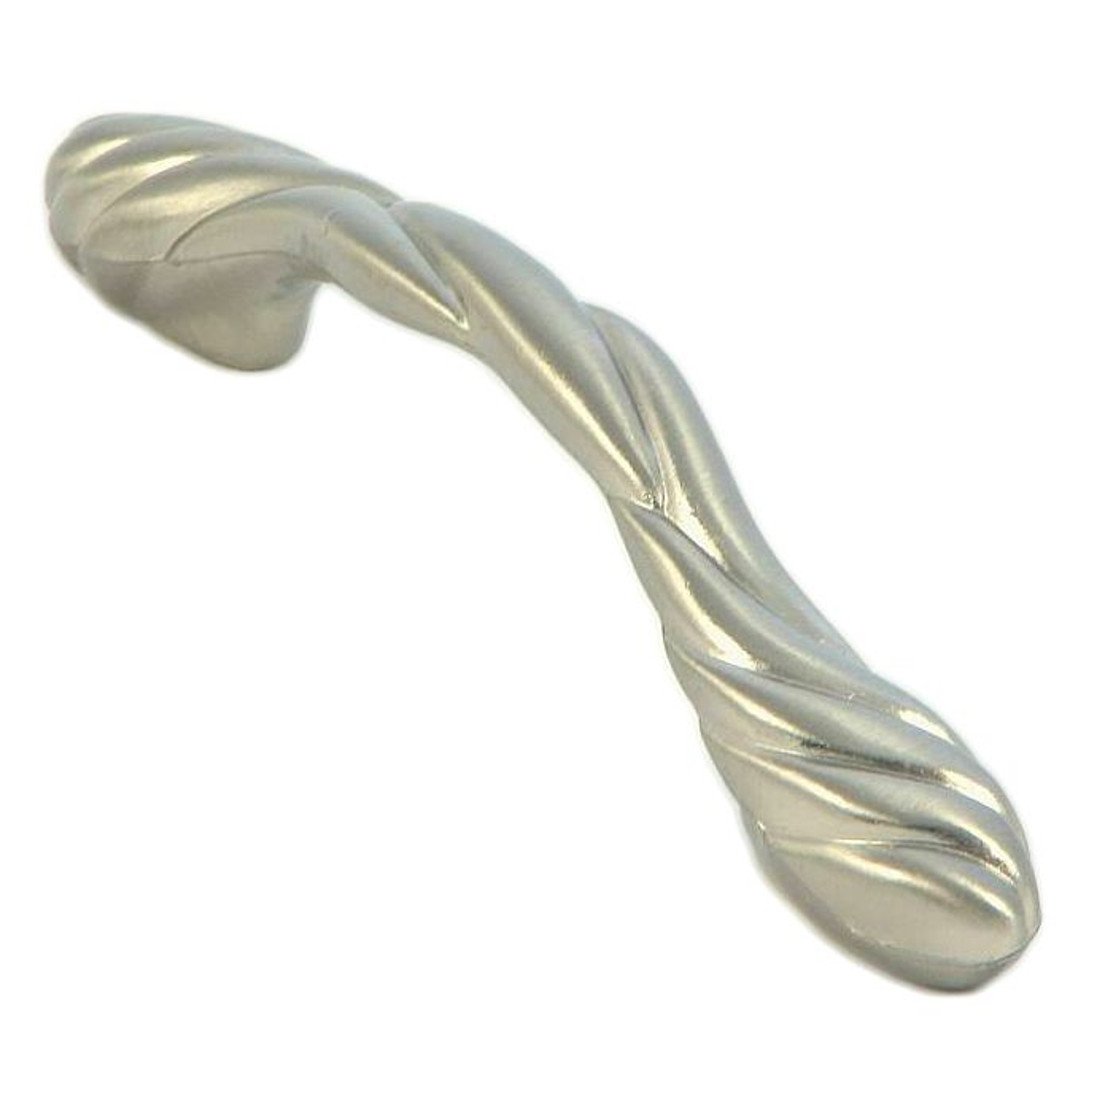 Braided 4-3/4" Cabinet Pull in Satin Nickel